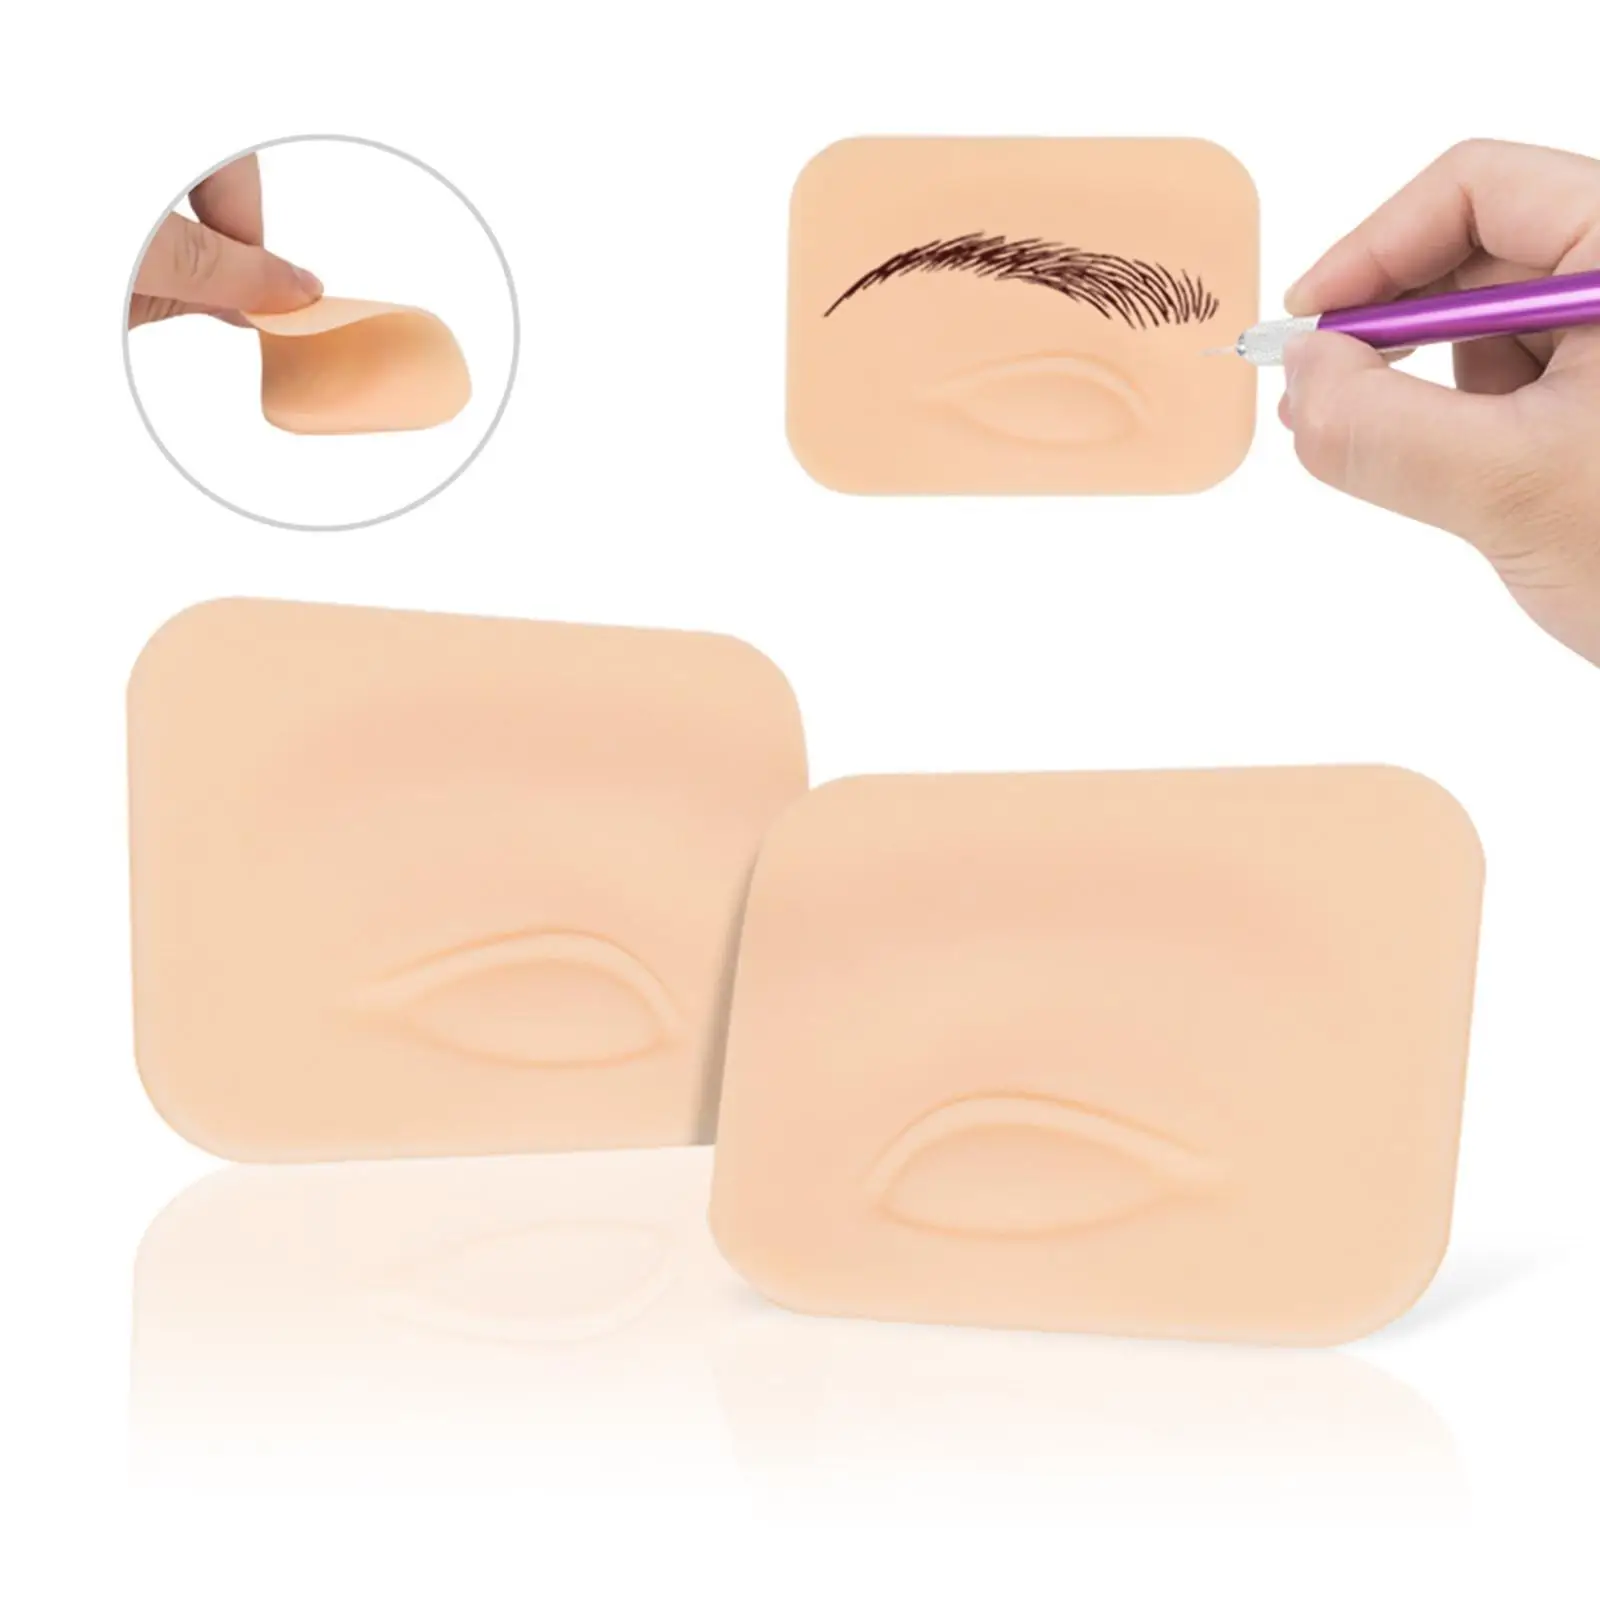 Silicone face Makeup Practice Board Reusable Eyelash Lashes pad for Beginner Practicing Makeup